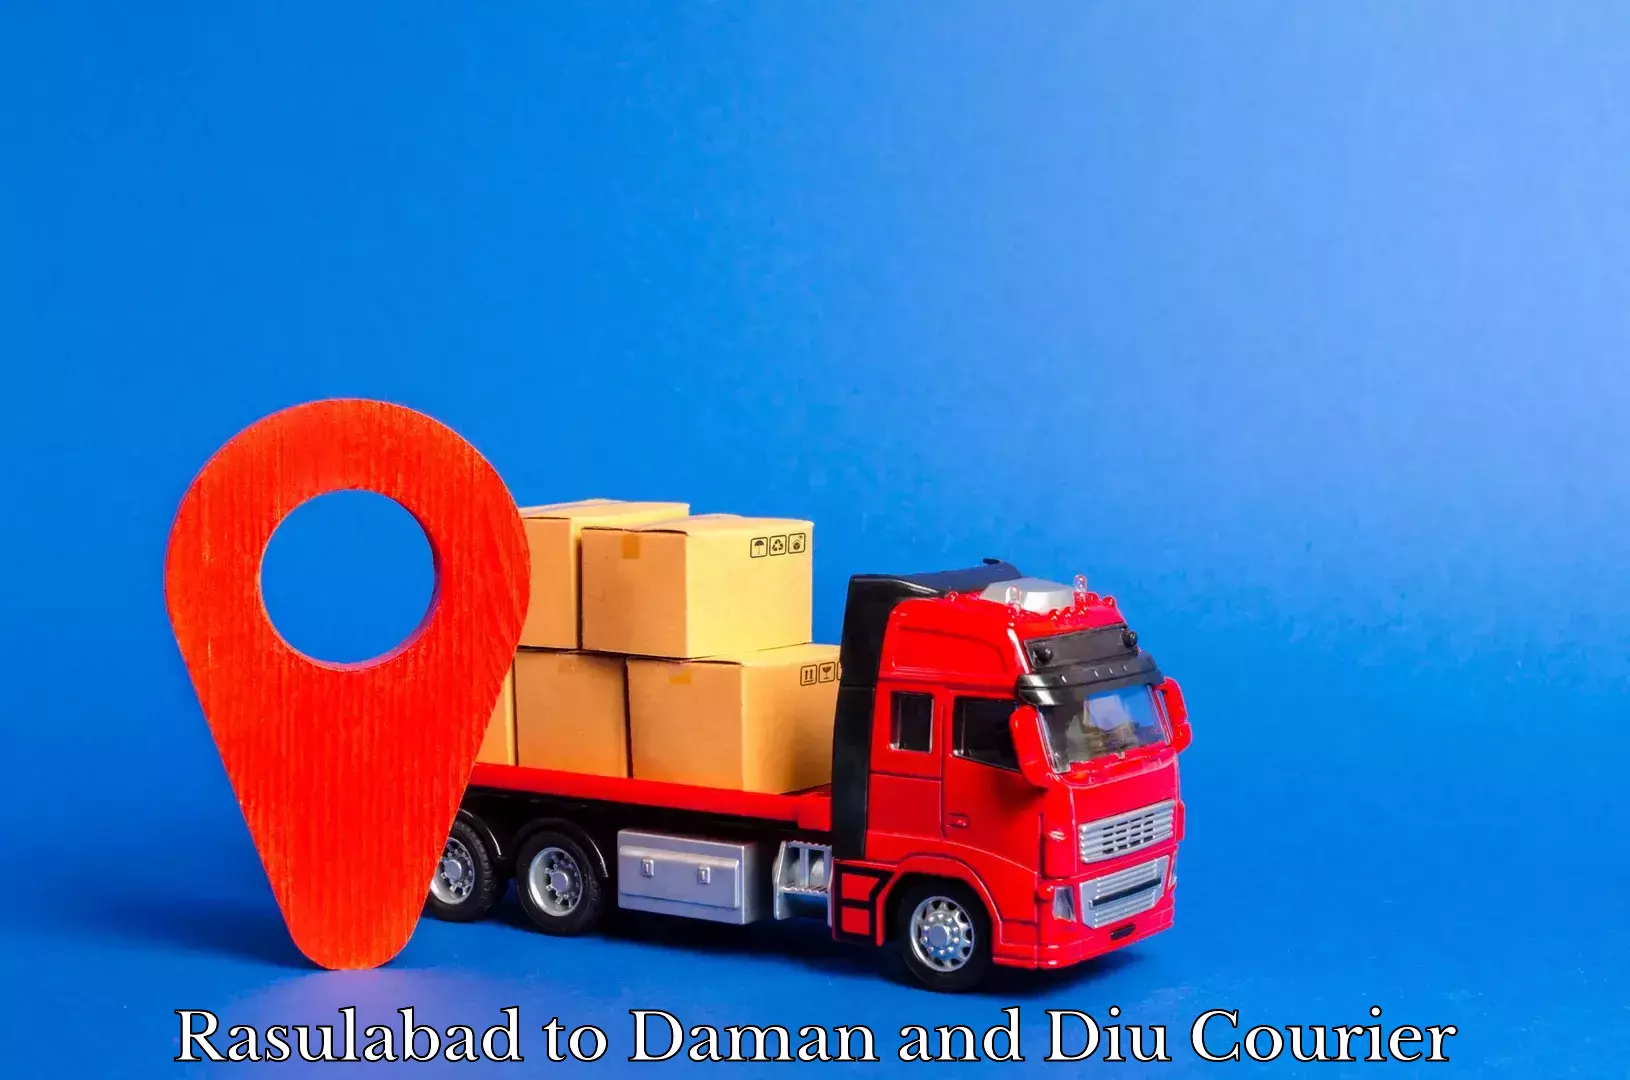 Express delivery network Rasulabad to Daman and Diu